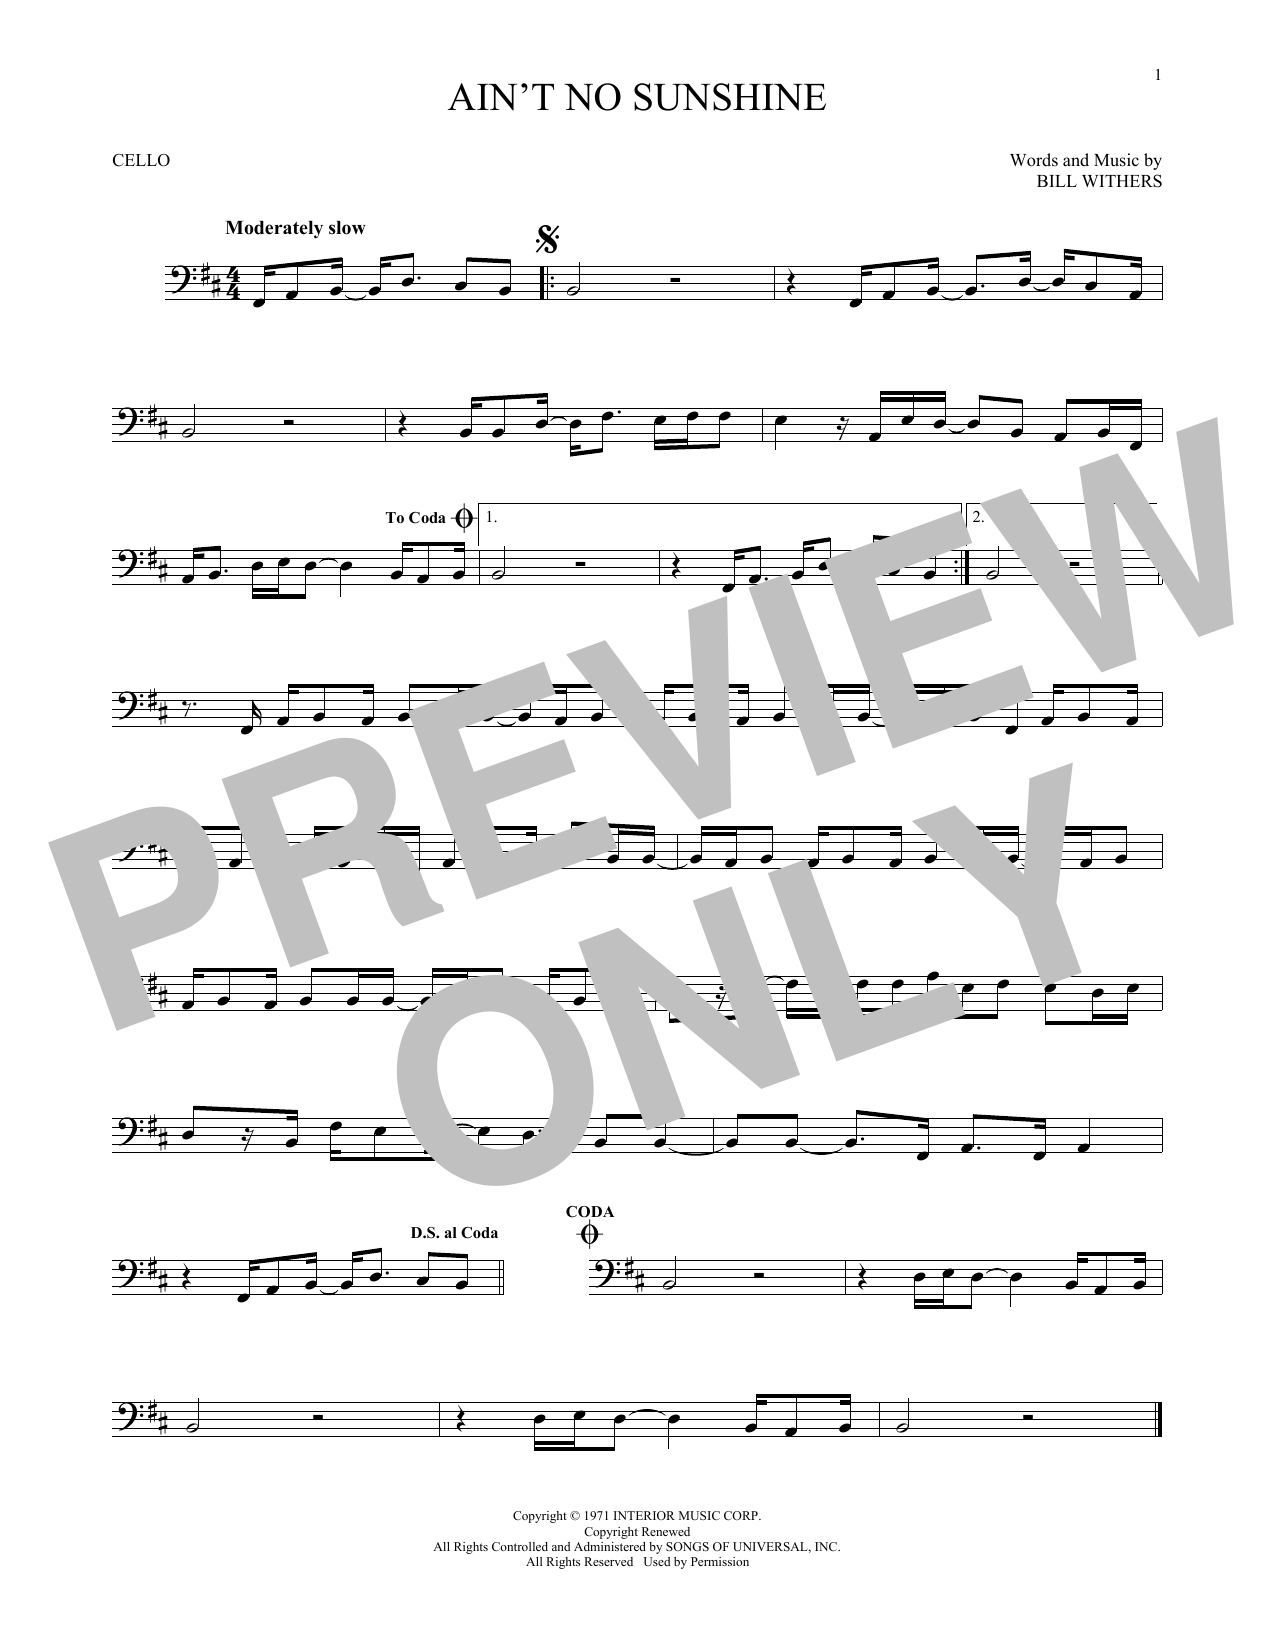 Download Bill Withers Ain't No Sunshine Sheet Music